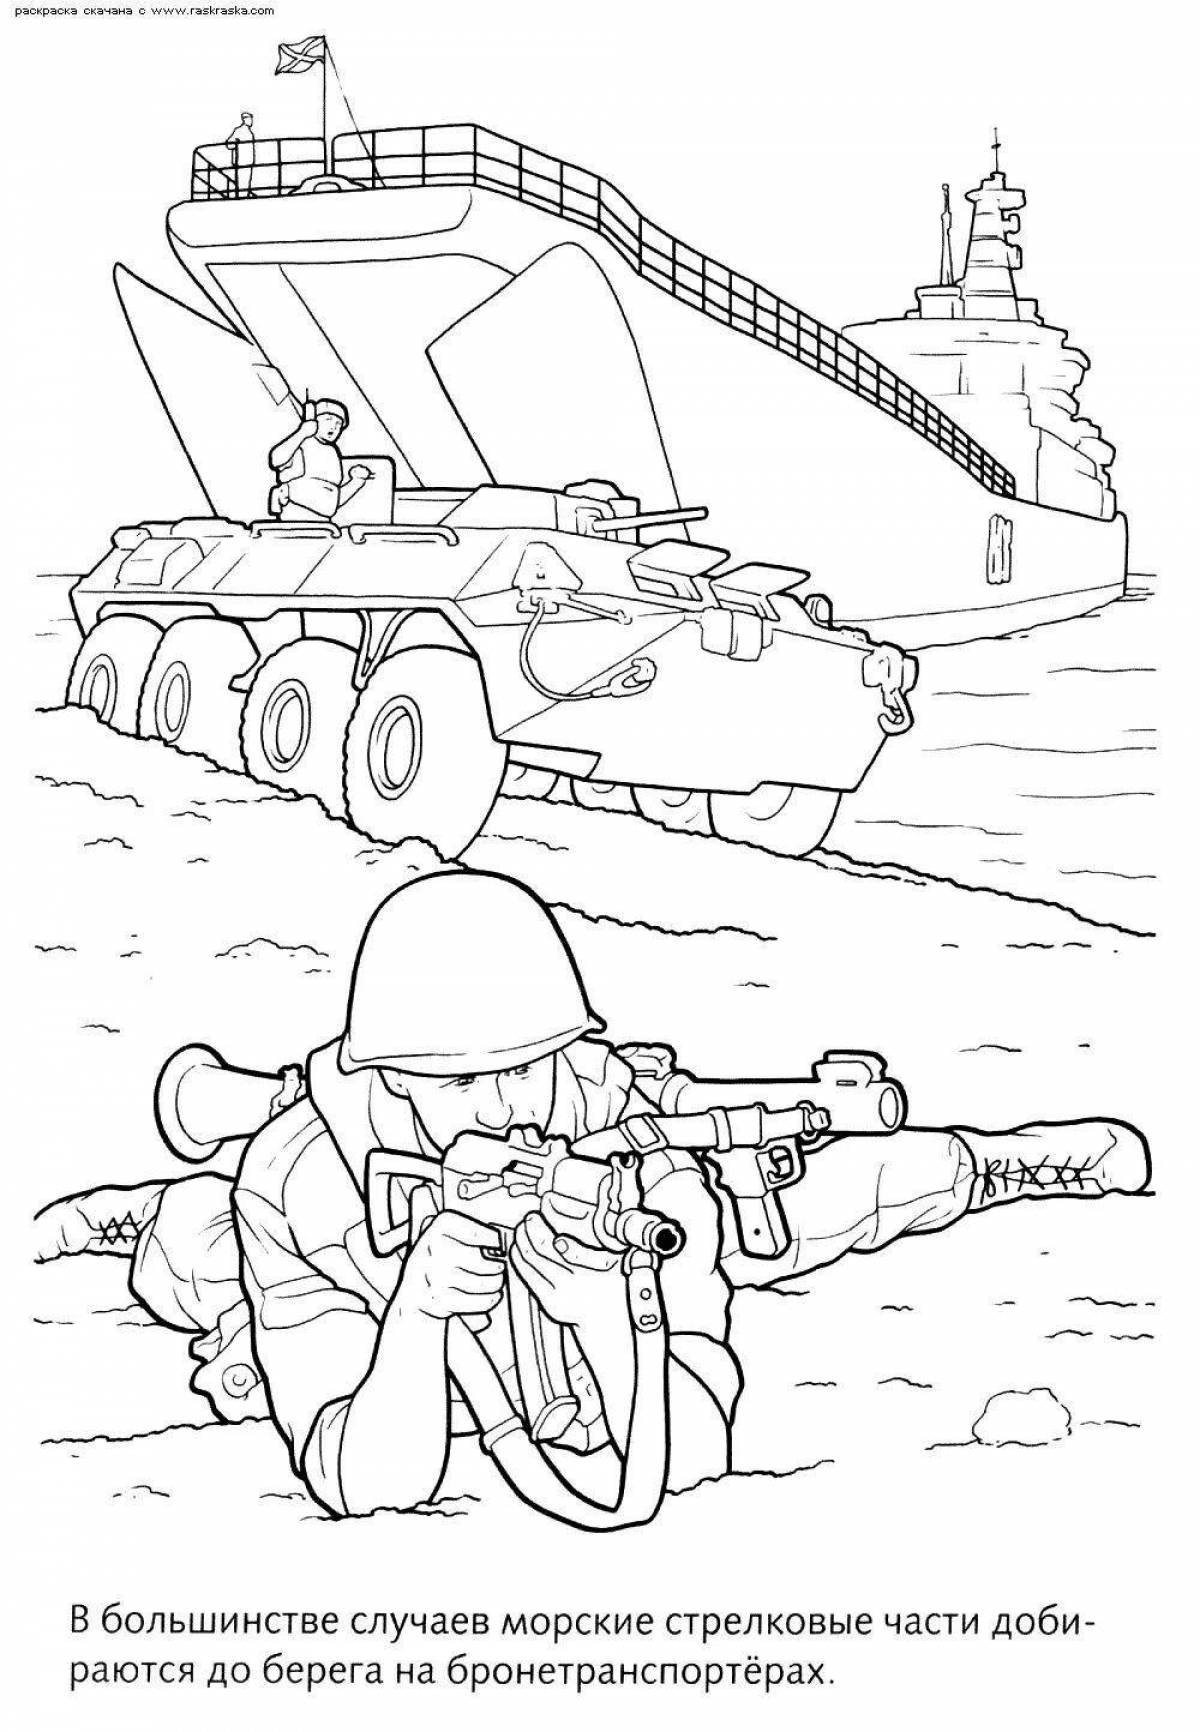 Quirky soldier coloring page February 23